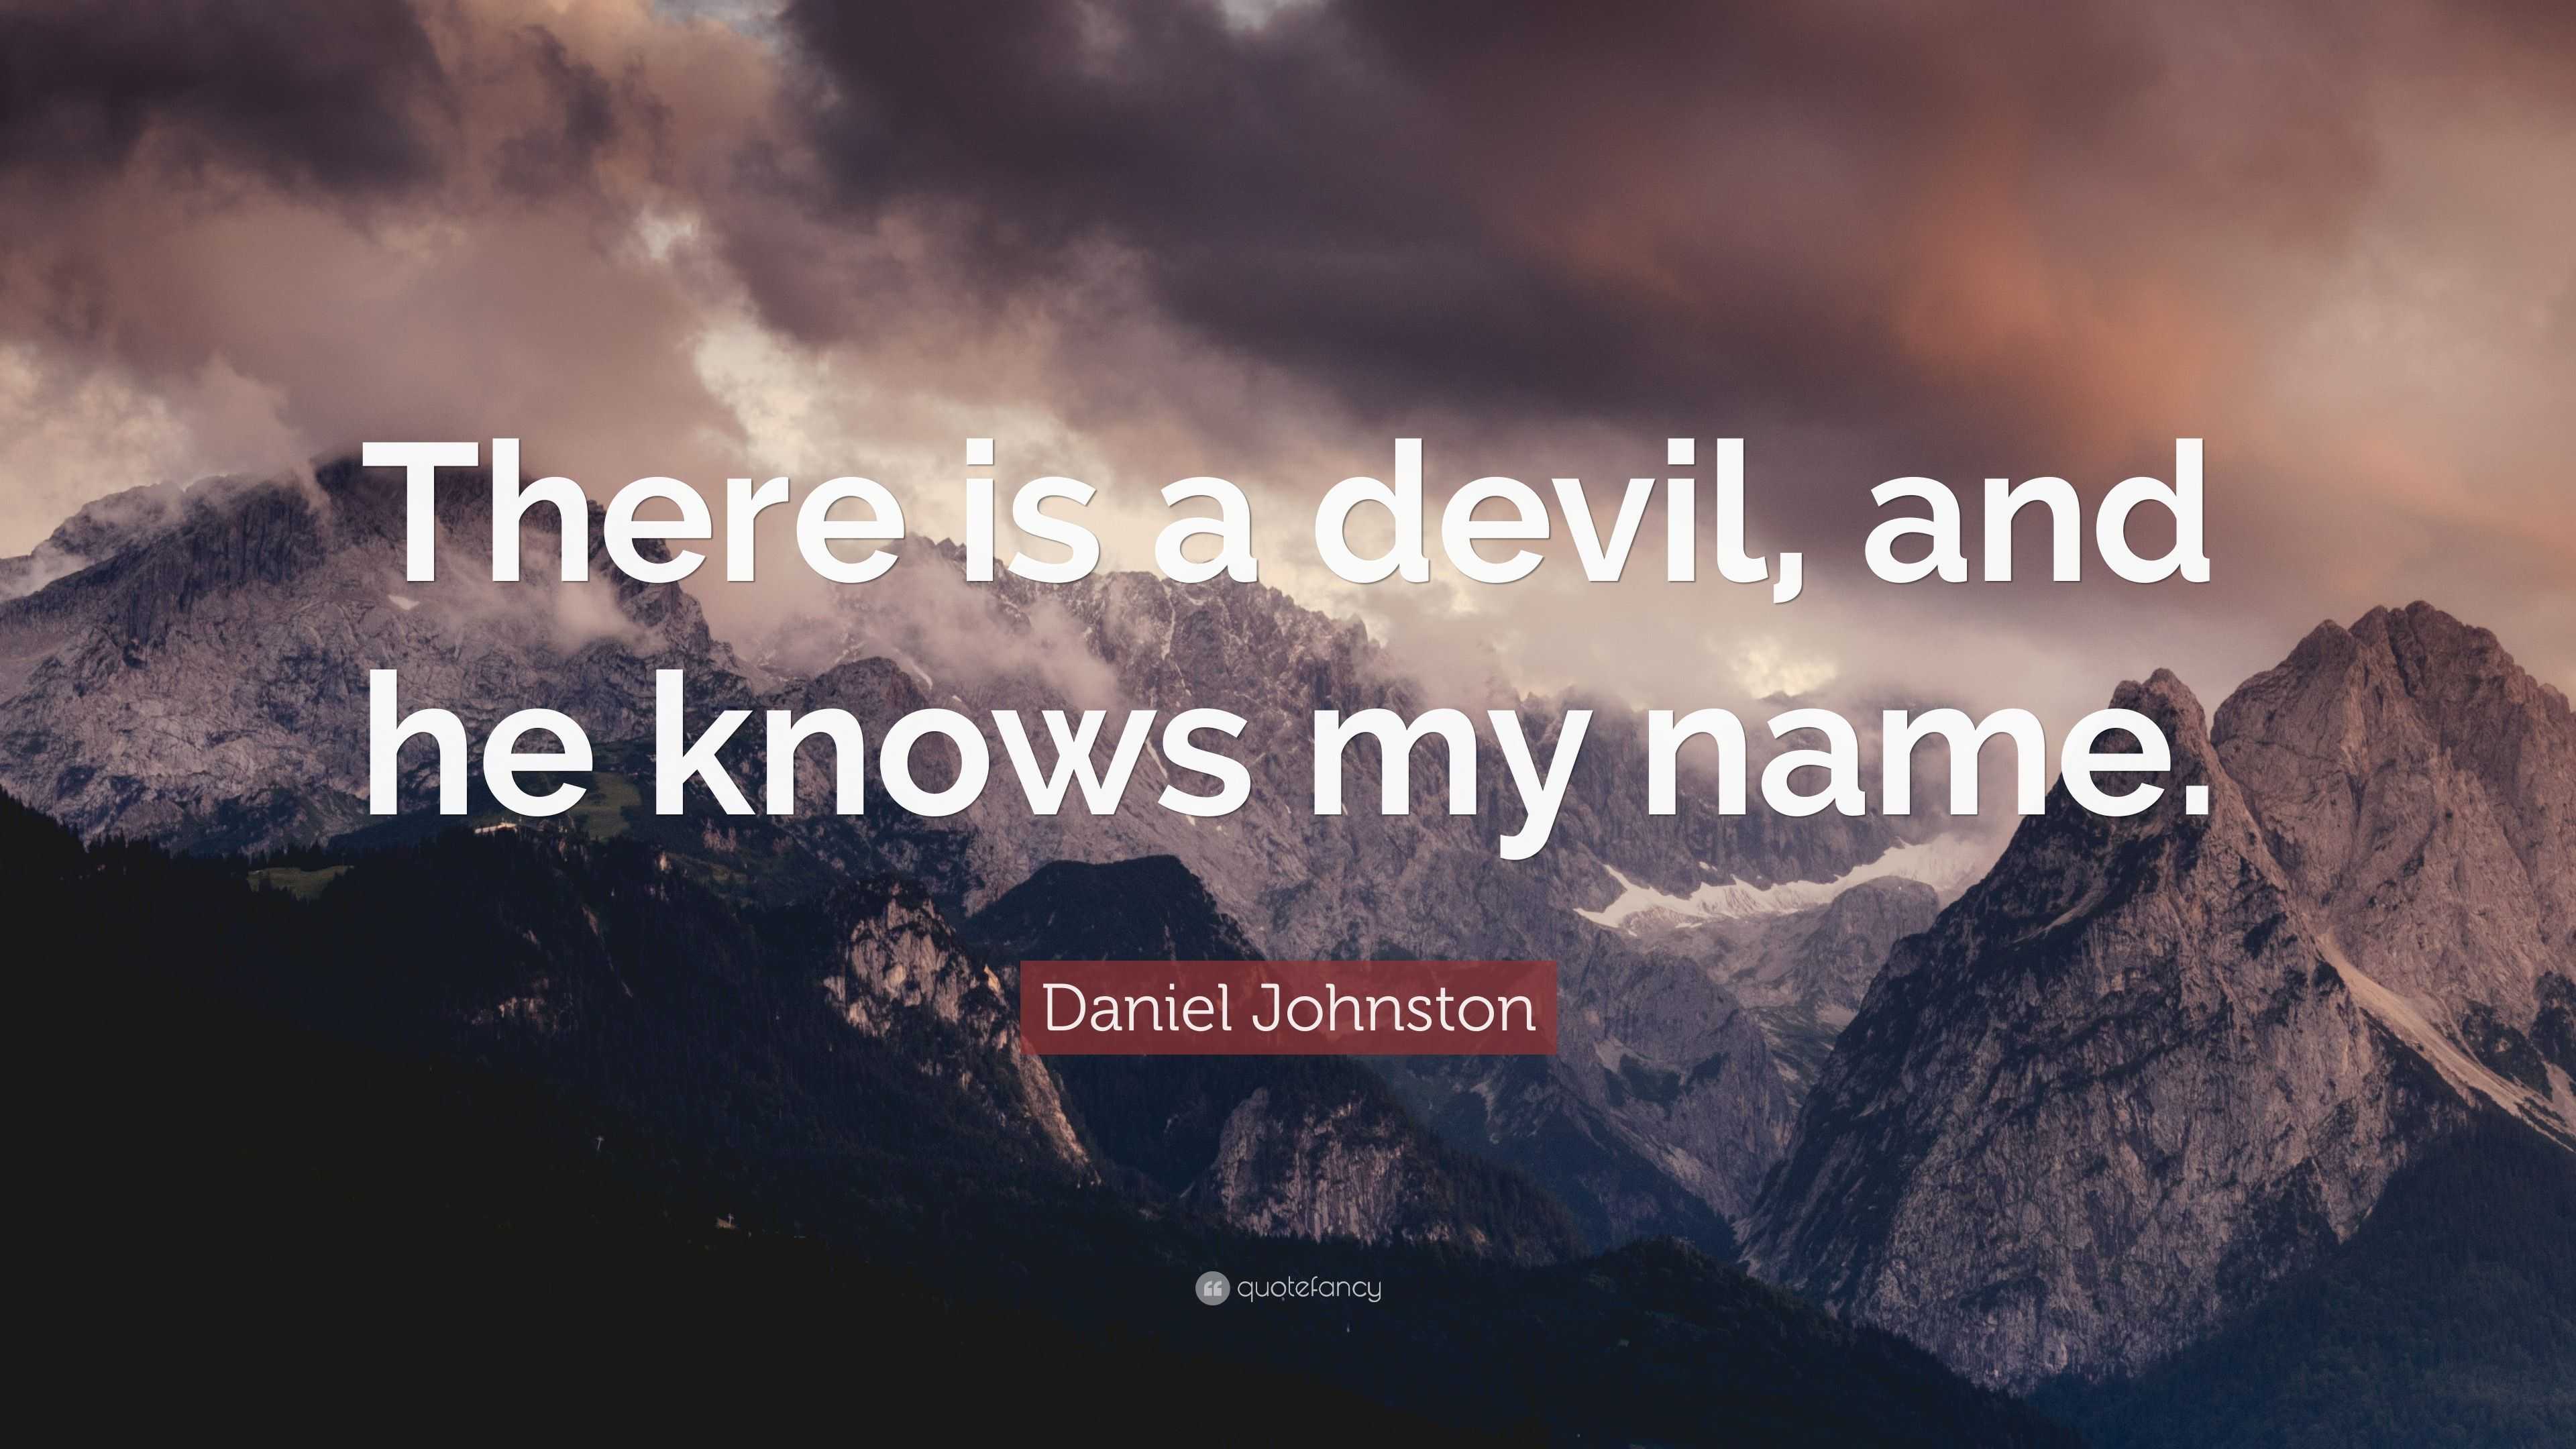 Daniel Johnston Quote: “There is a devil, and he knows my name.”